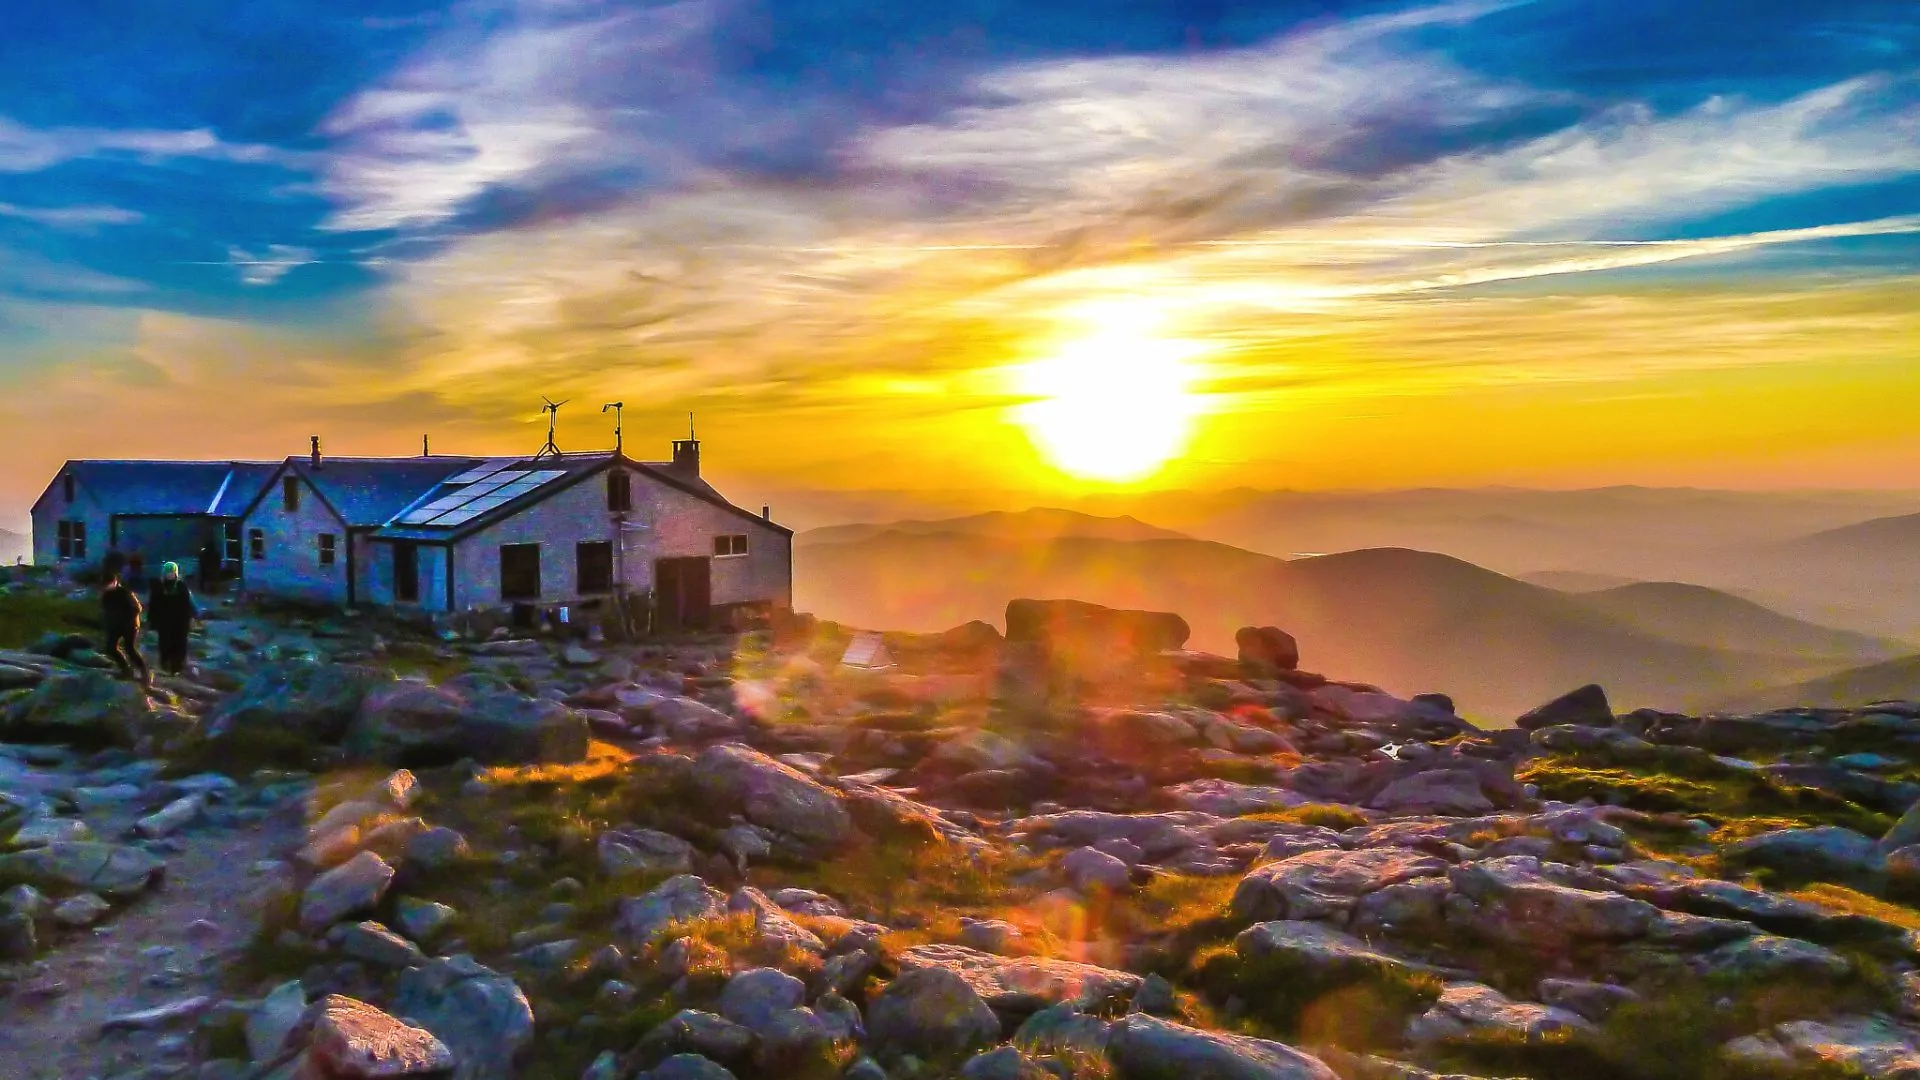 Lake of the Clouds Hut sits on the ridge of the Presidential Range in New Hampshire's White Mountains